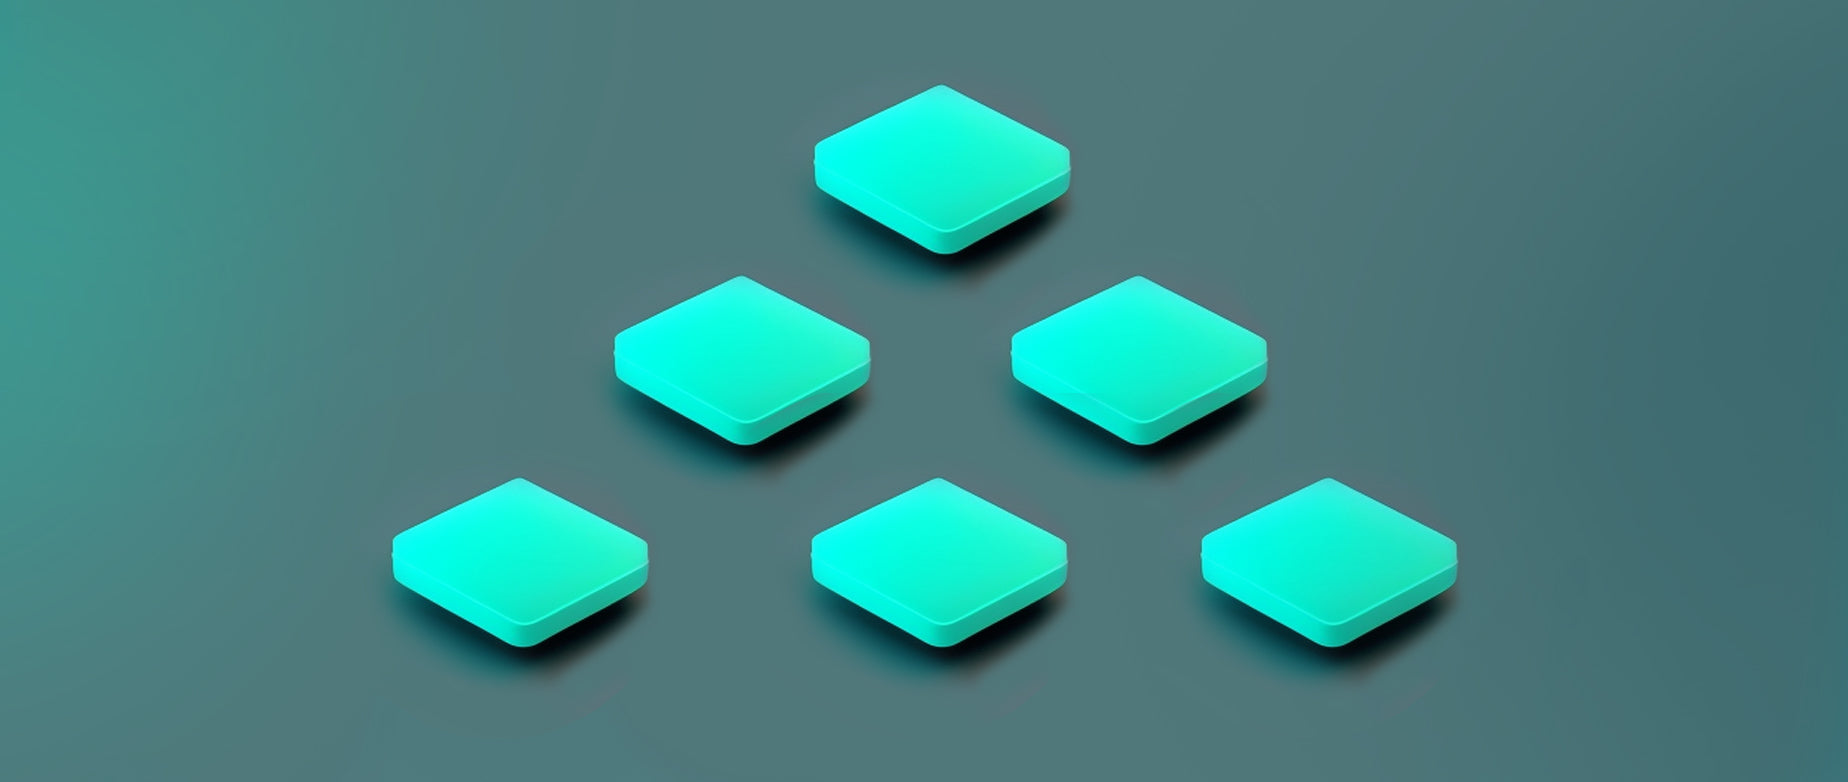 a stack of teal squares against a dark teal background: MarTech stack